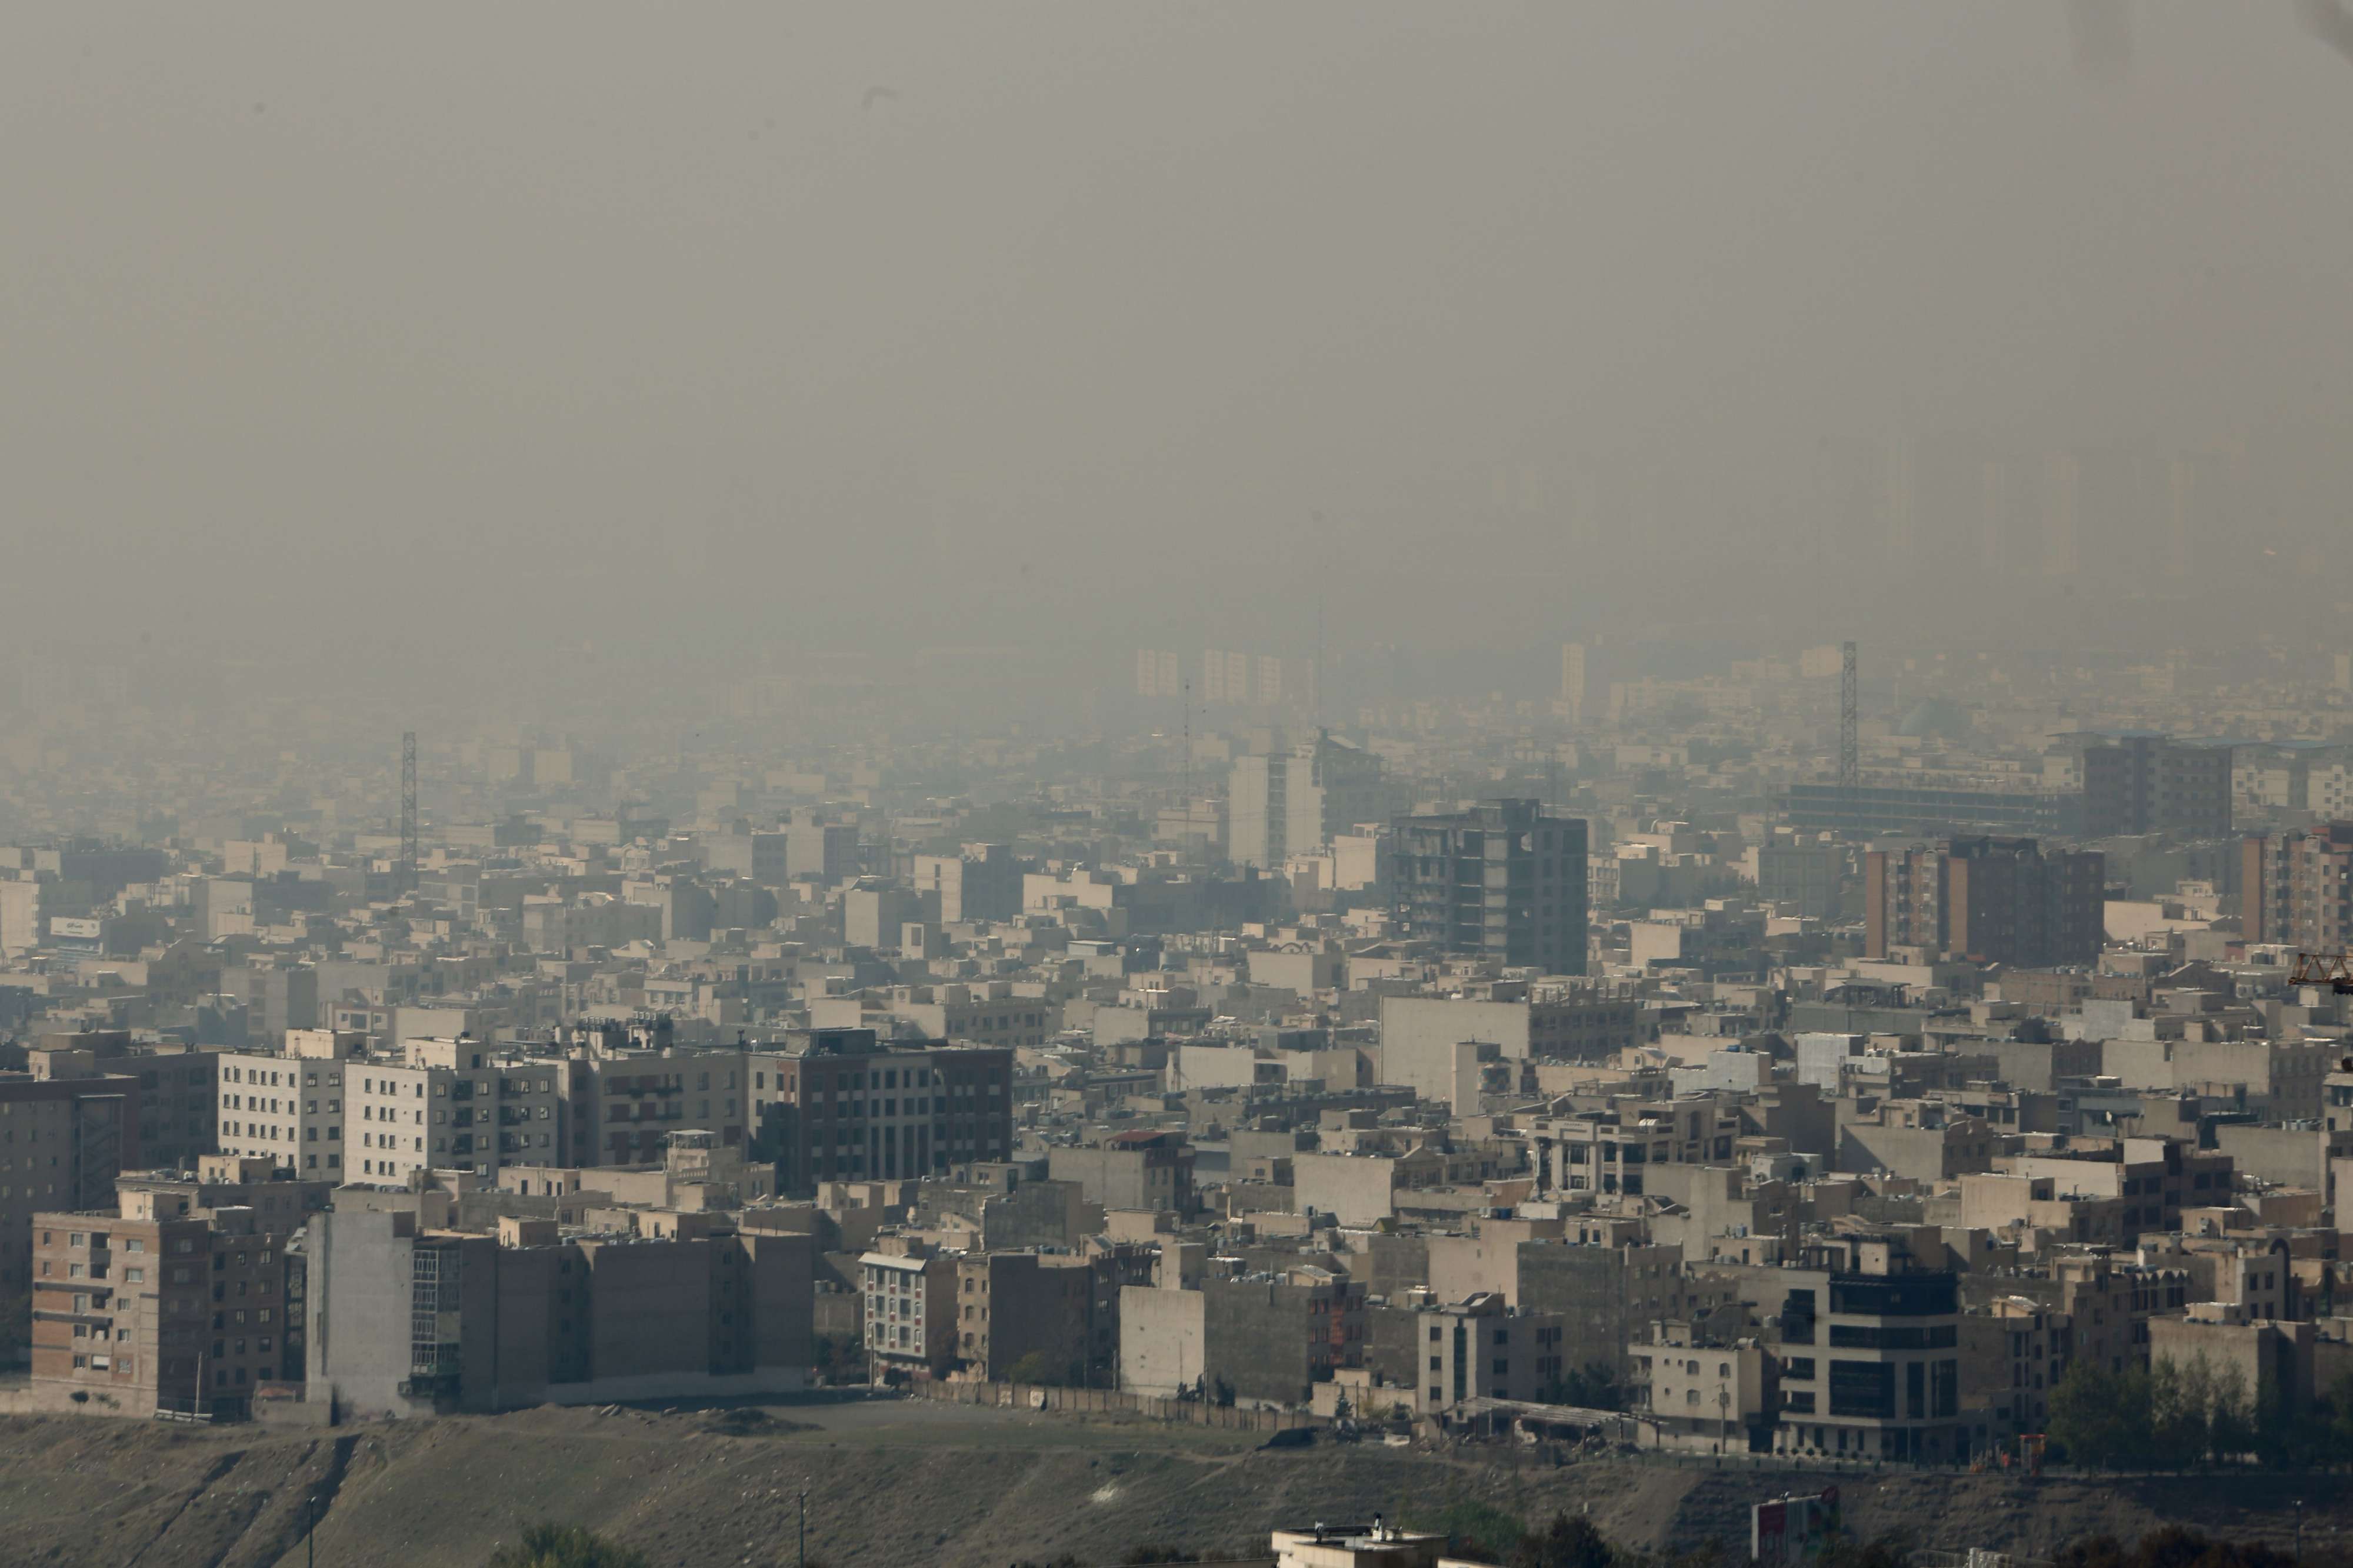 The problem worsens in Tehran during winter, cold air and a lack of wind traps hazardous smog over the city for days on end